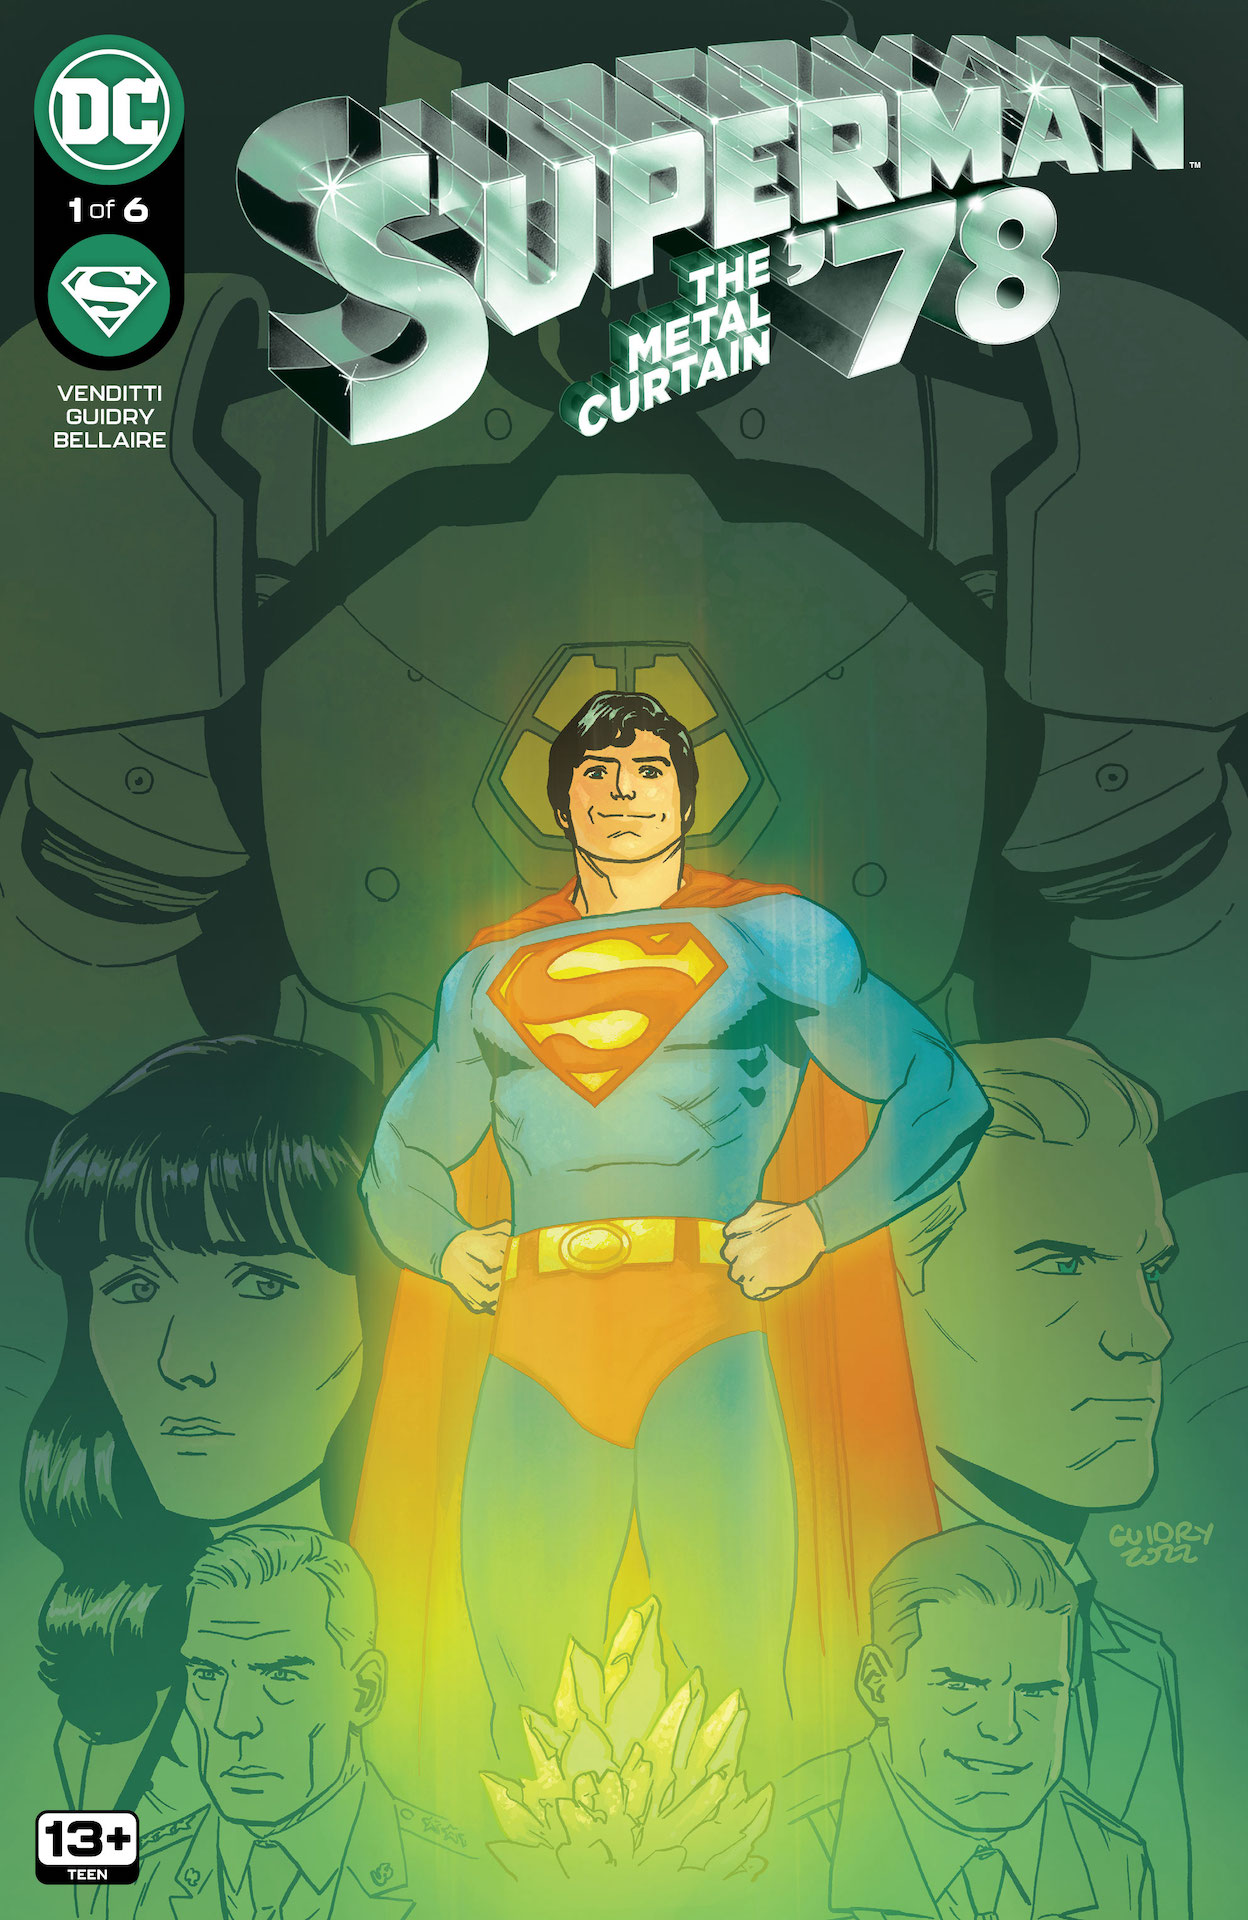 DC Preview: Superman '78: The Metal Curtain #1